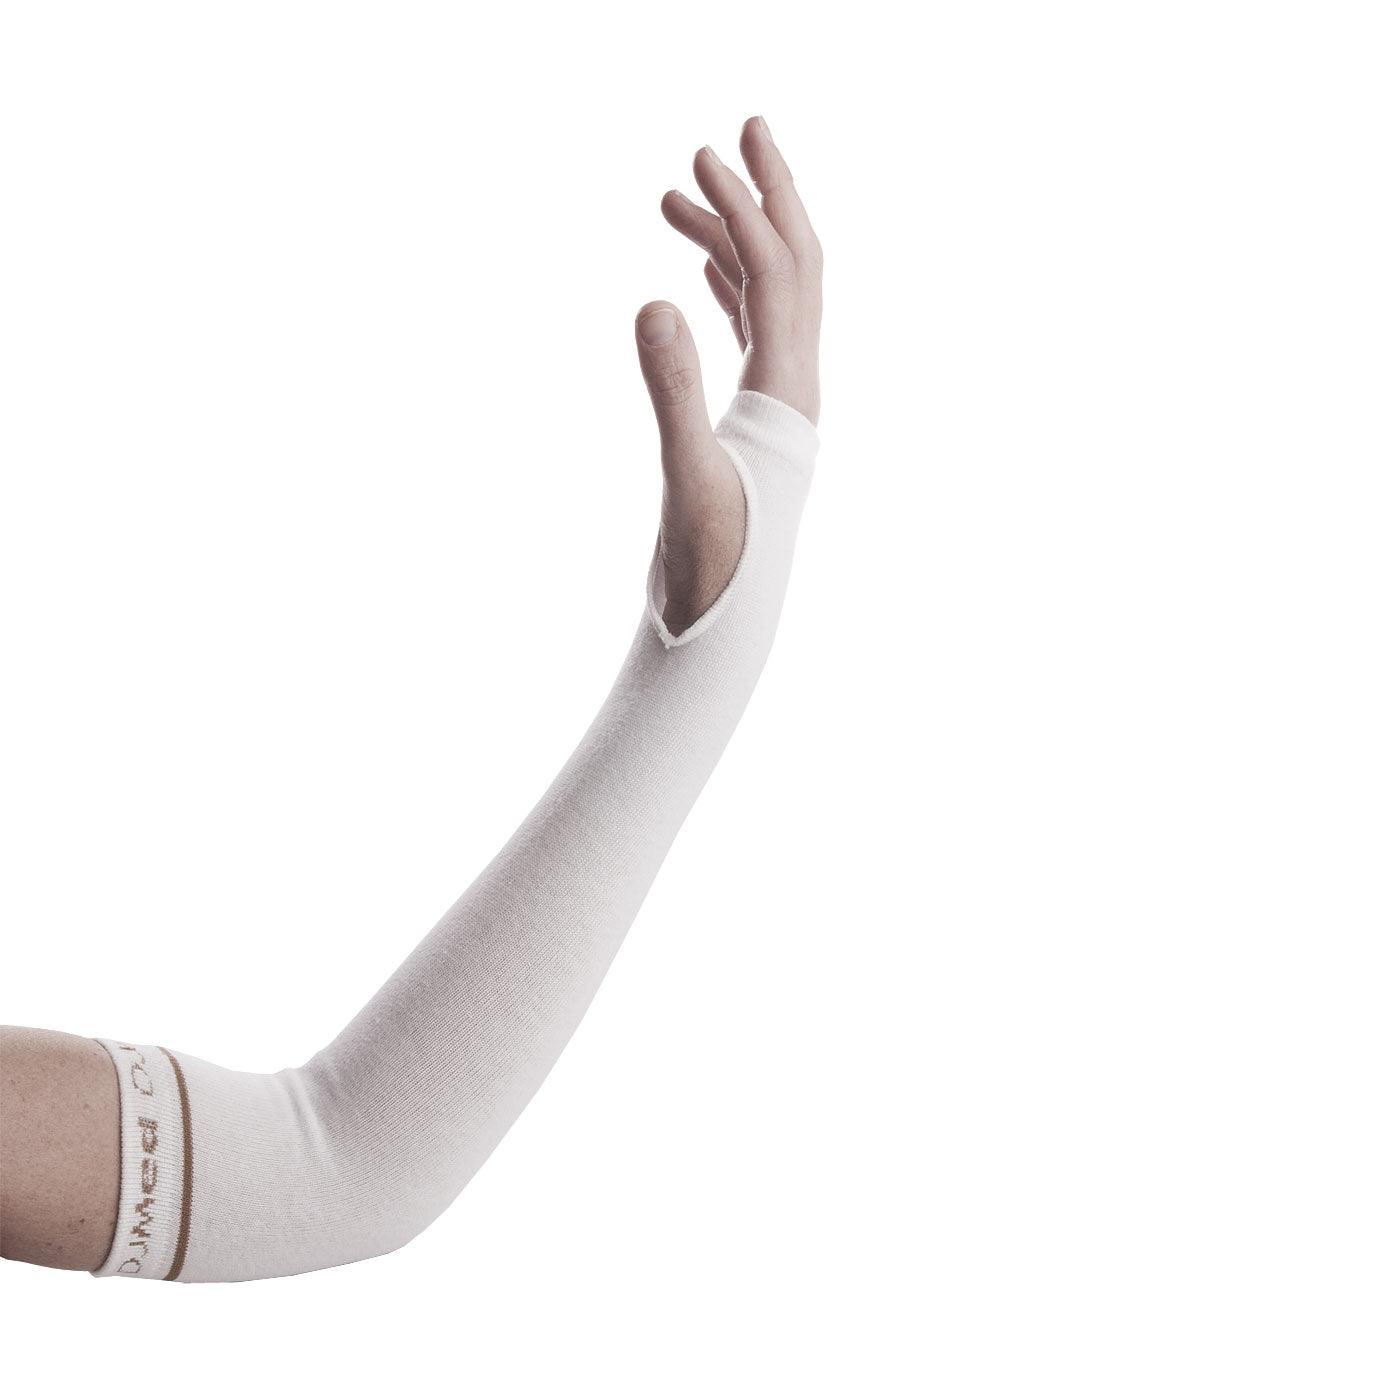 Skin Protectors For Arms - White - Medium